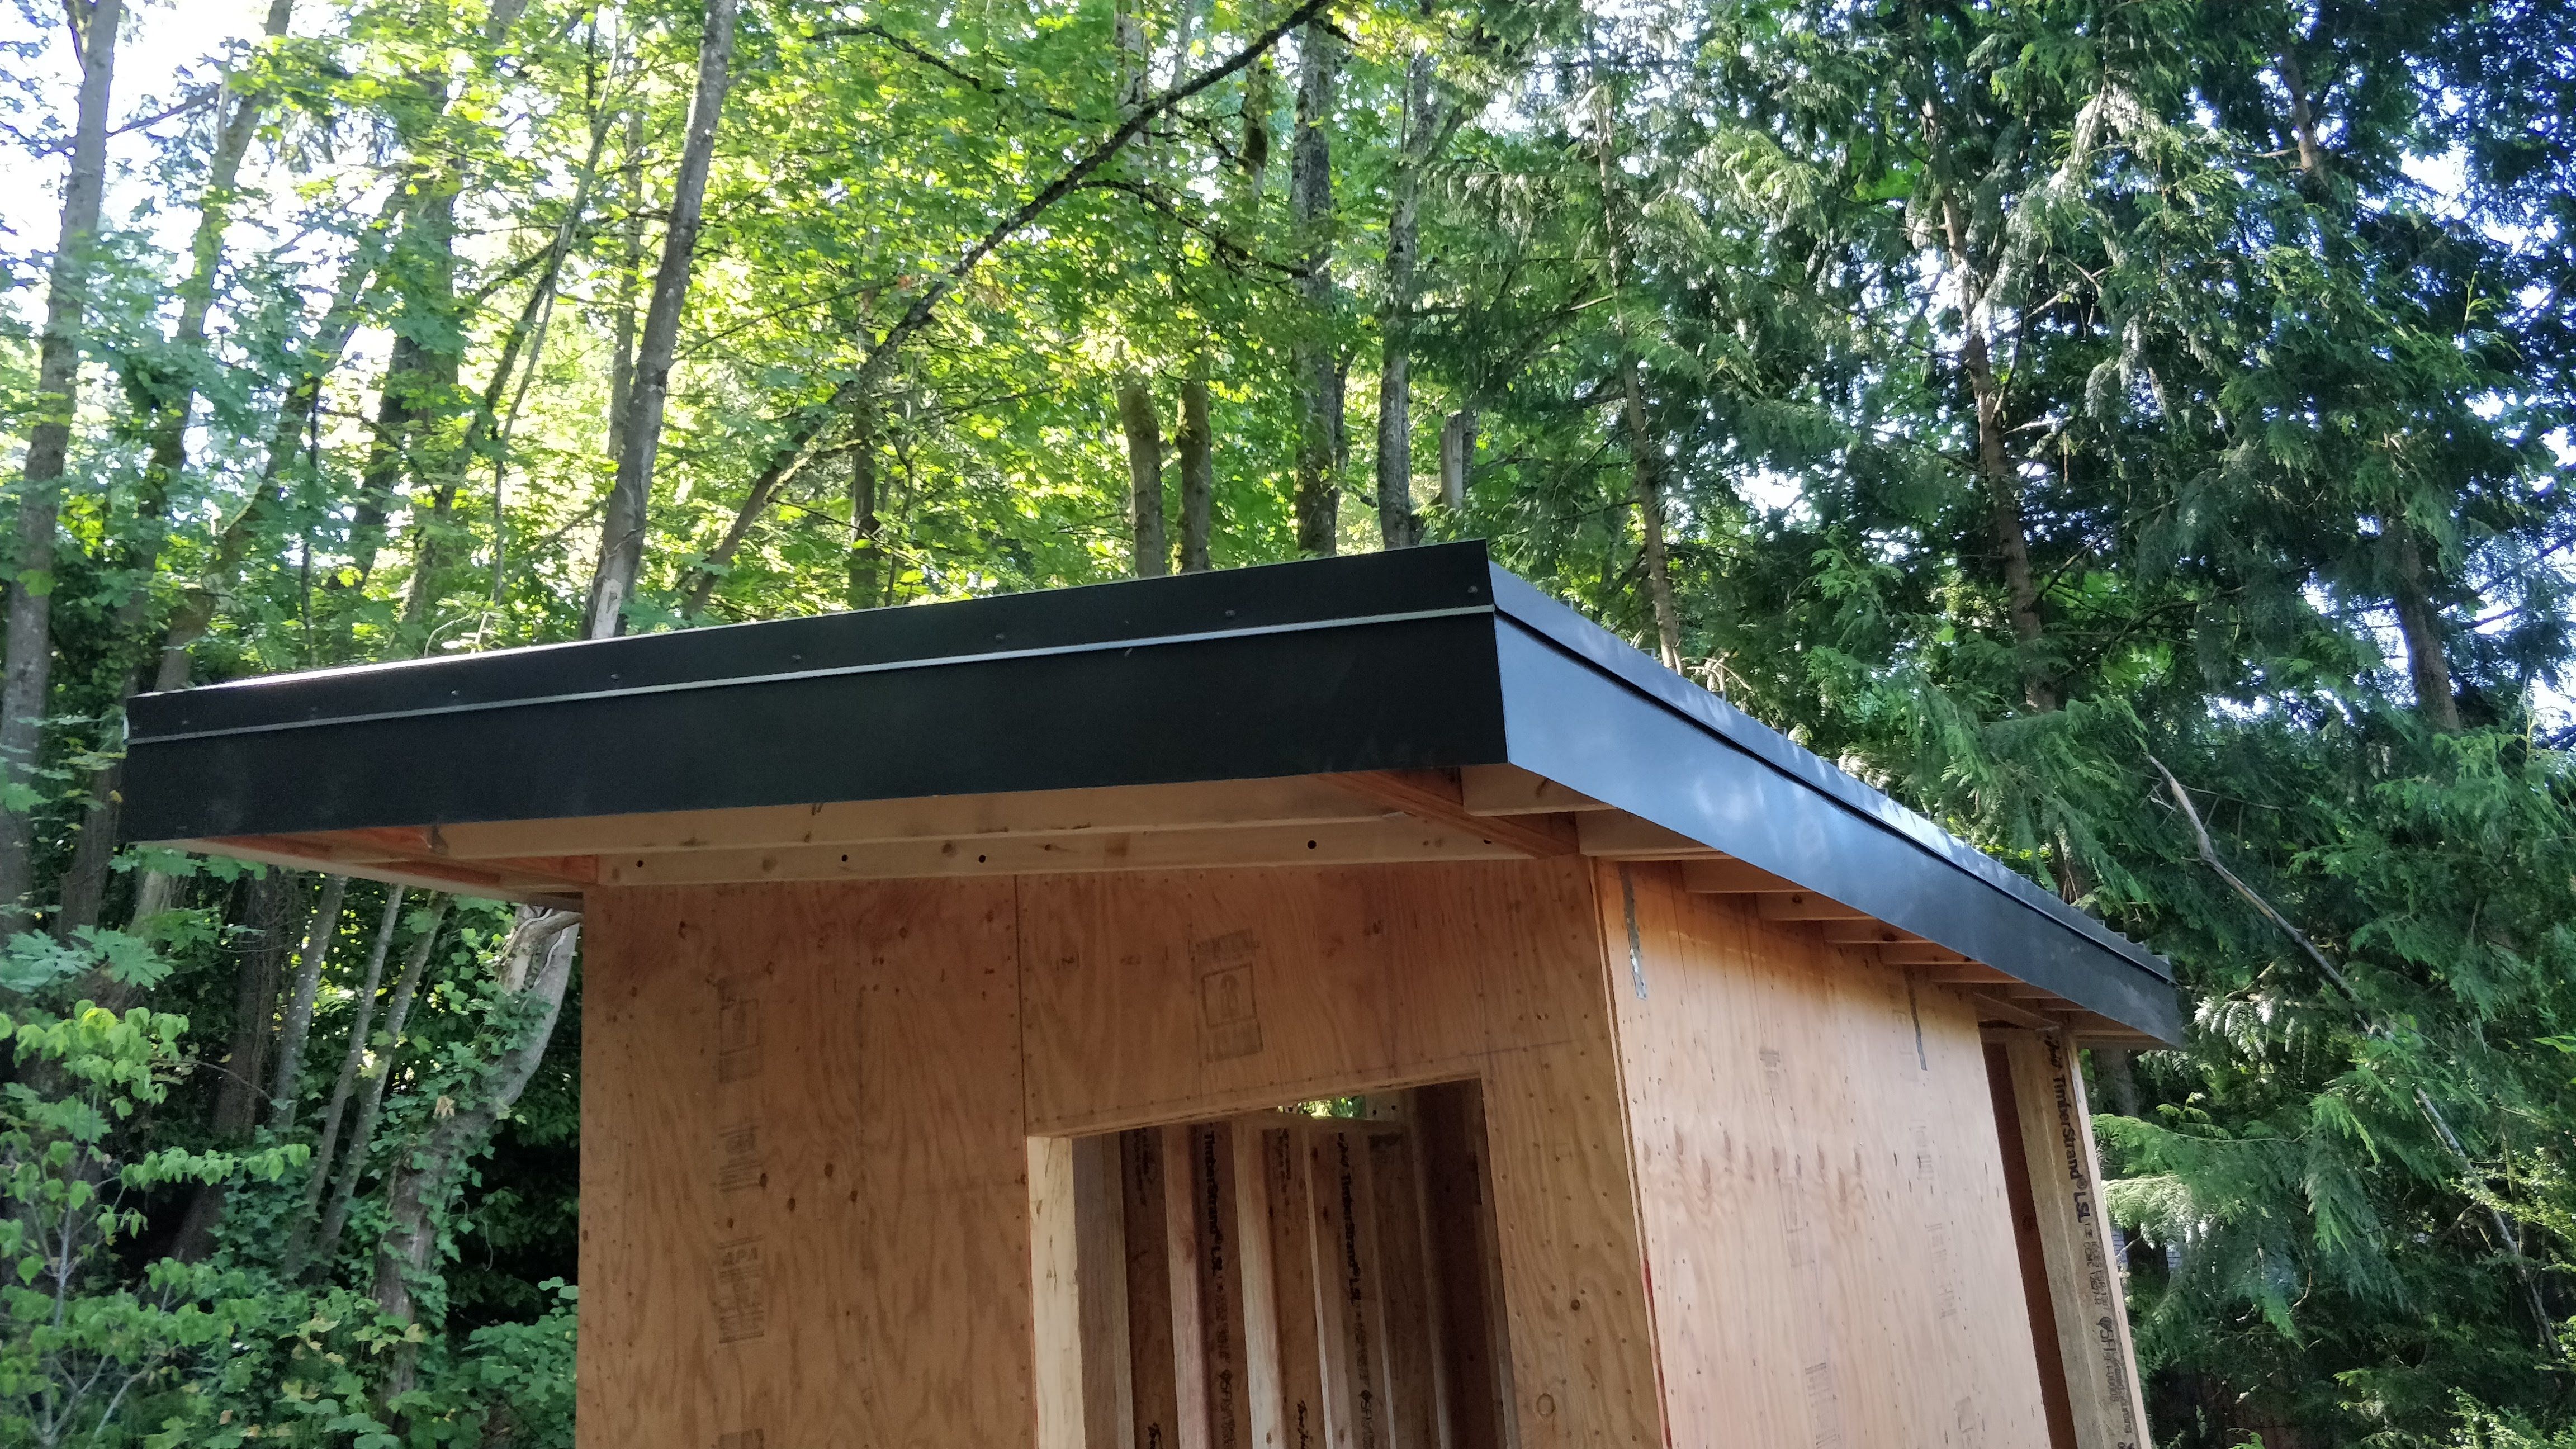 Finished roof, from below